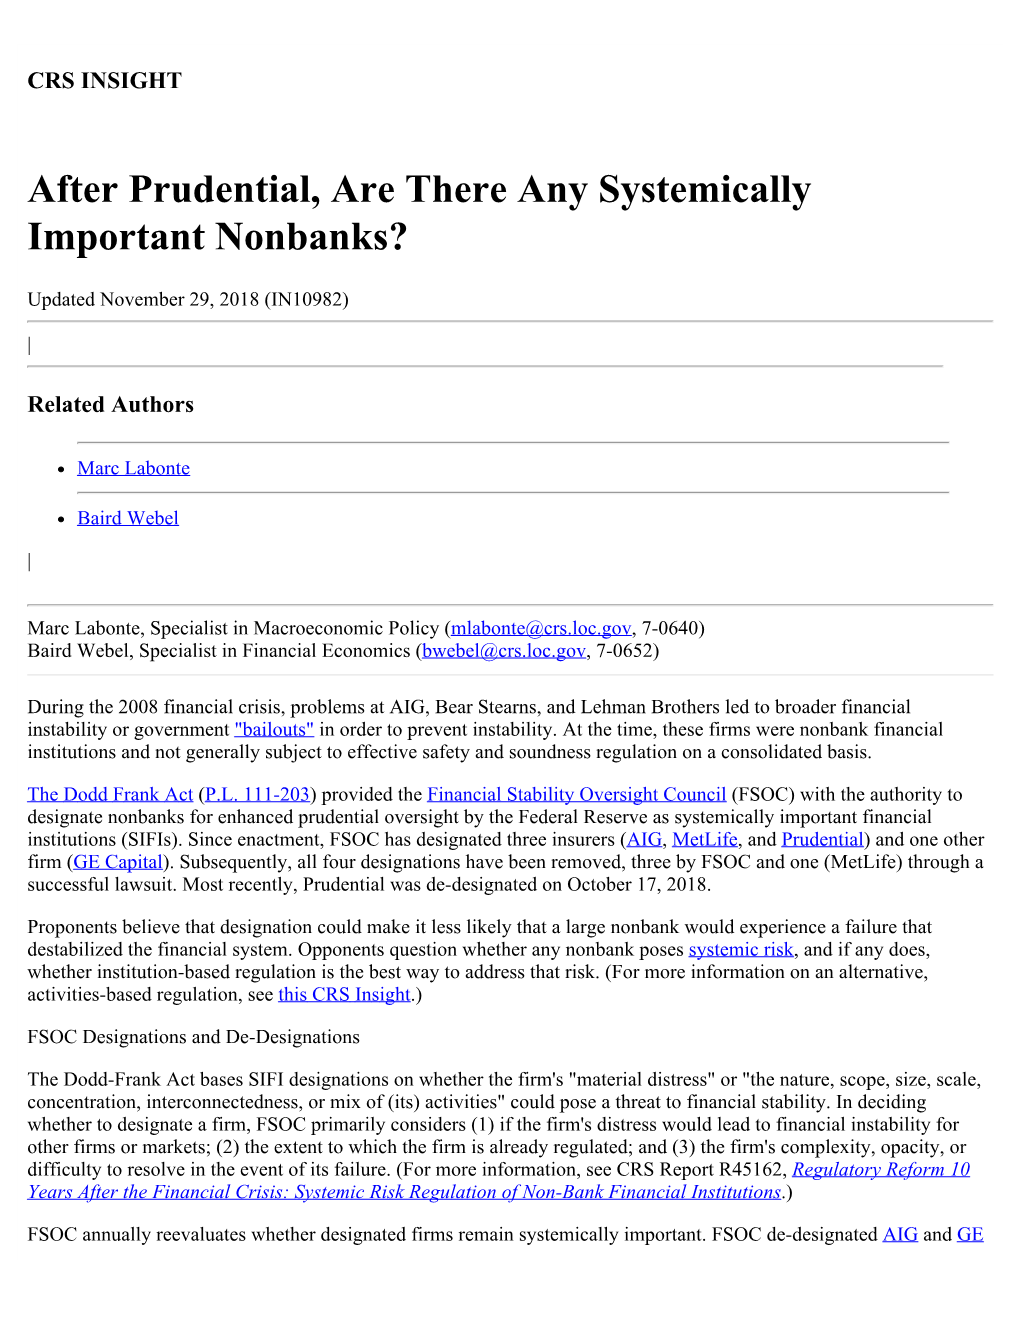 After Prudential, Are There Any Systemically Important Nonbanks?